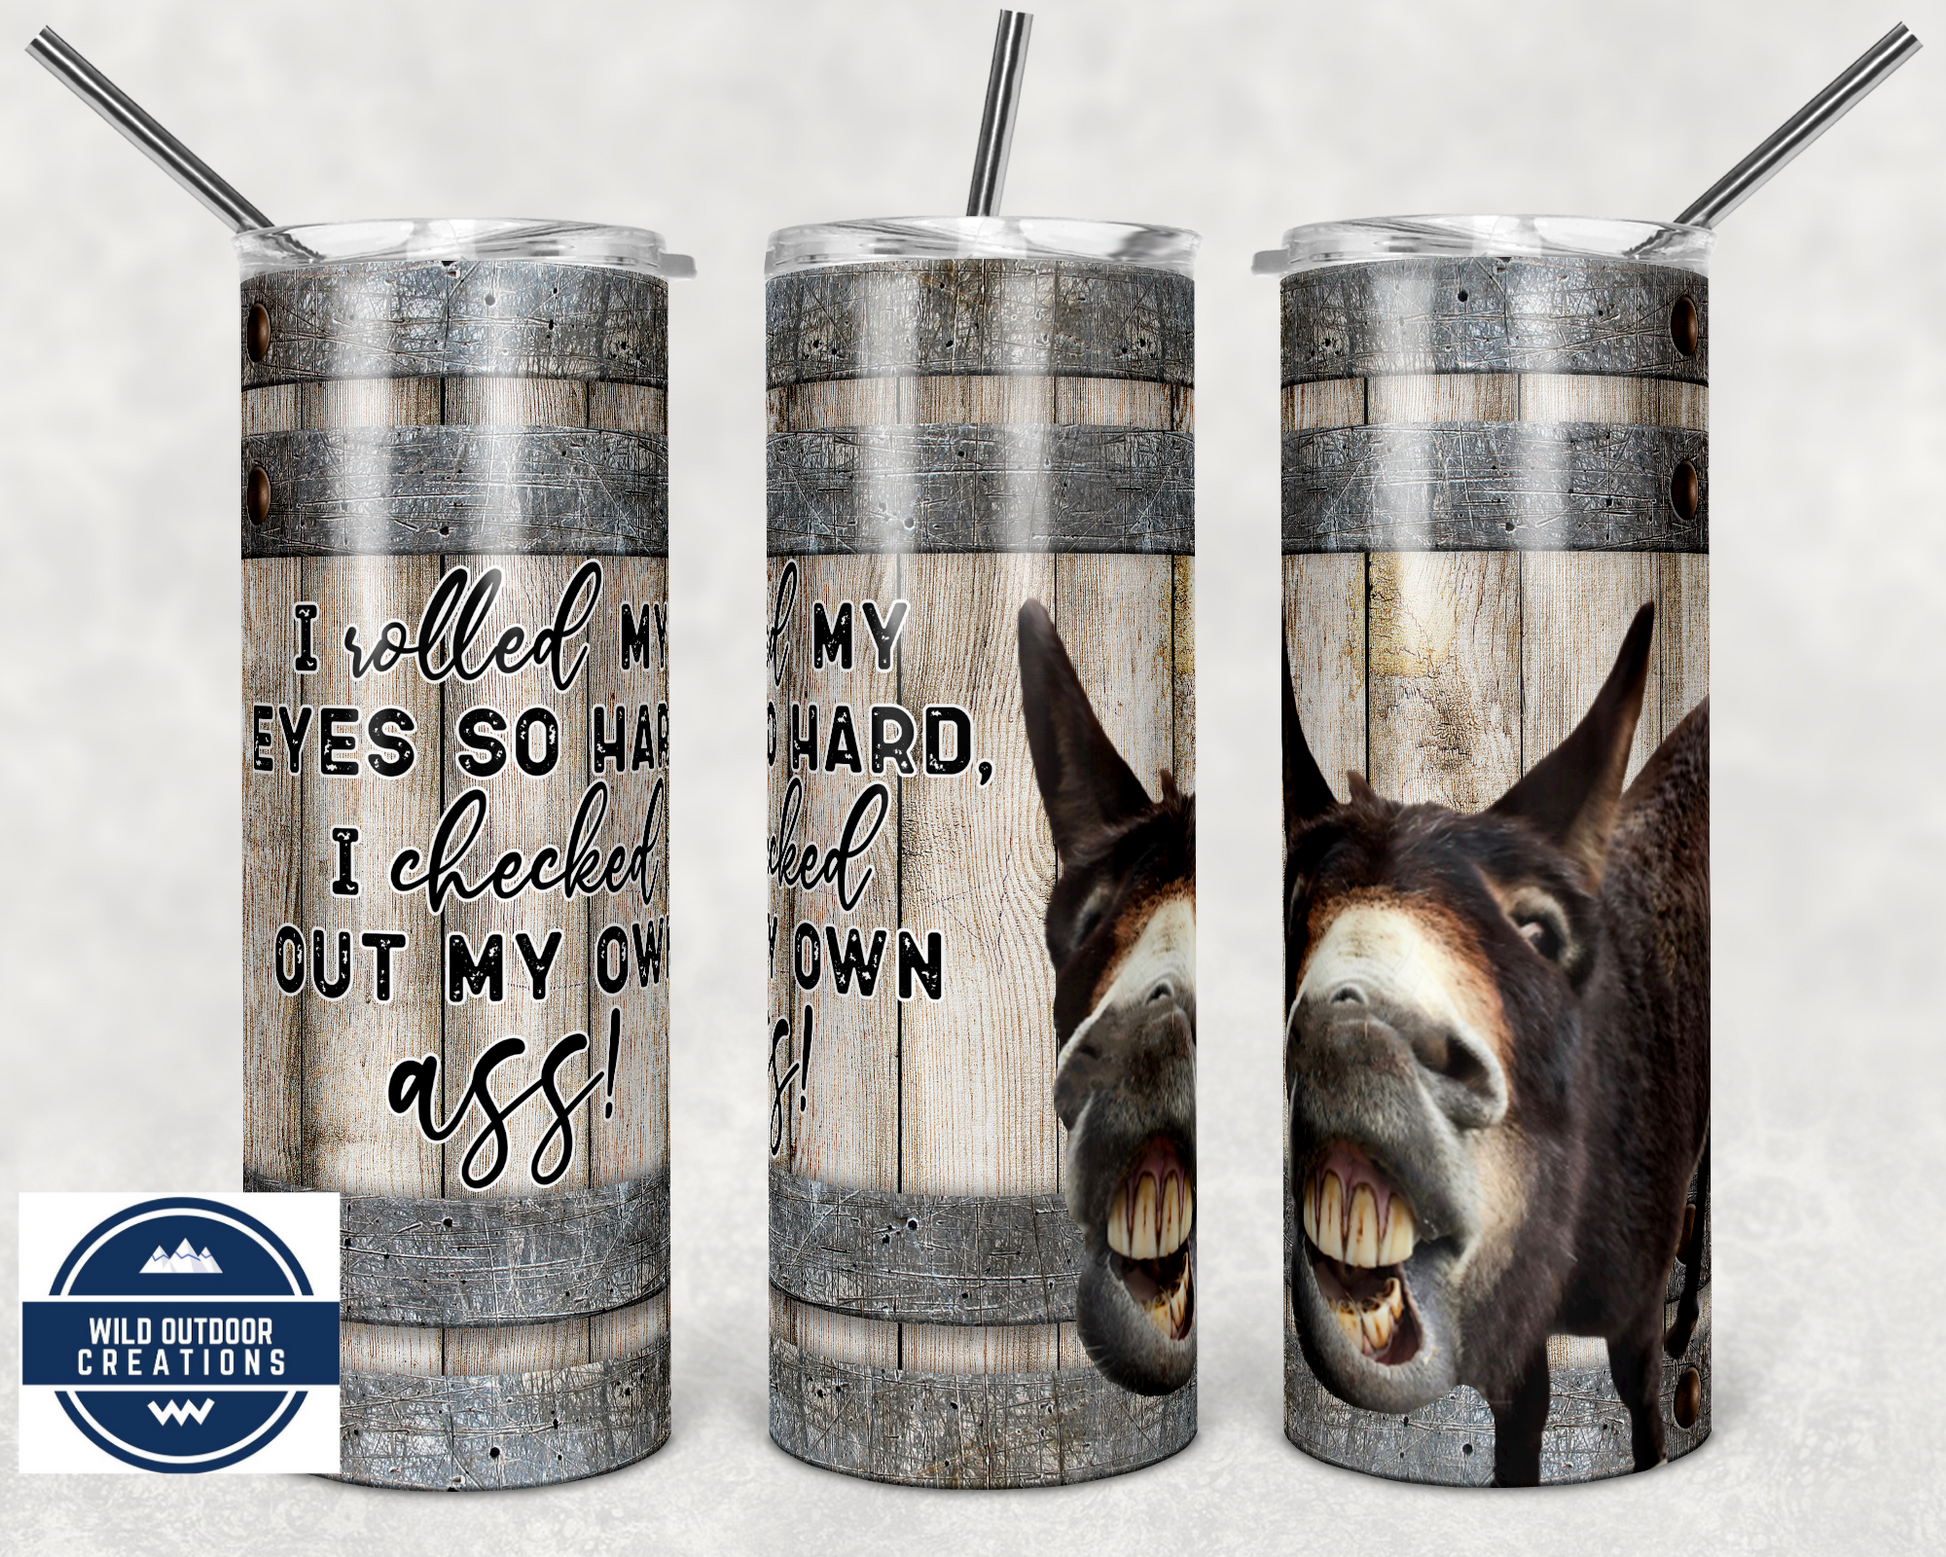 I rolled my eyes so hard, Funny Saying Tumbler, To Go Cup with Lid and straw, Travel Coffee Mug - Wild Outdoor Creations 